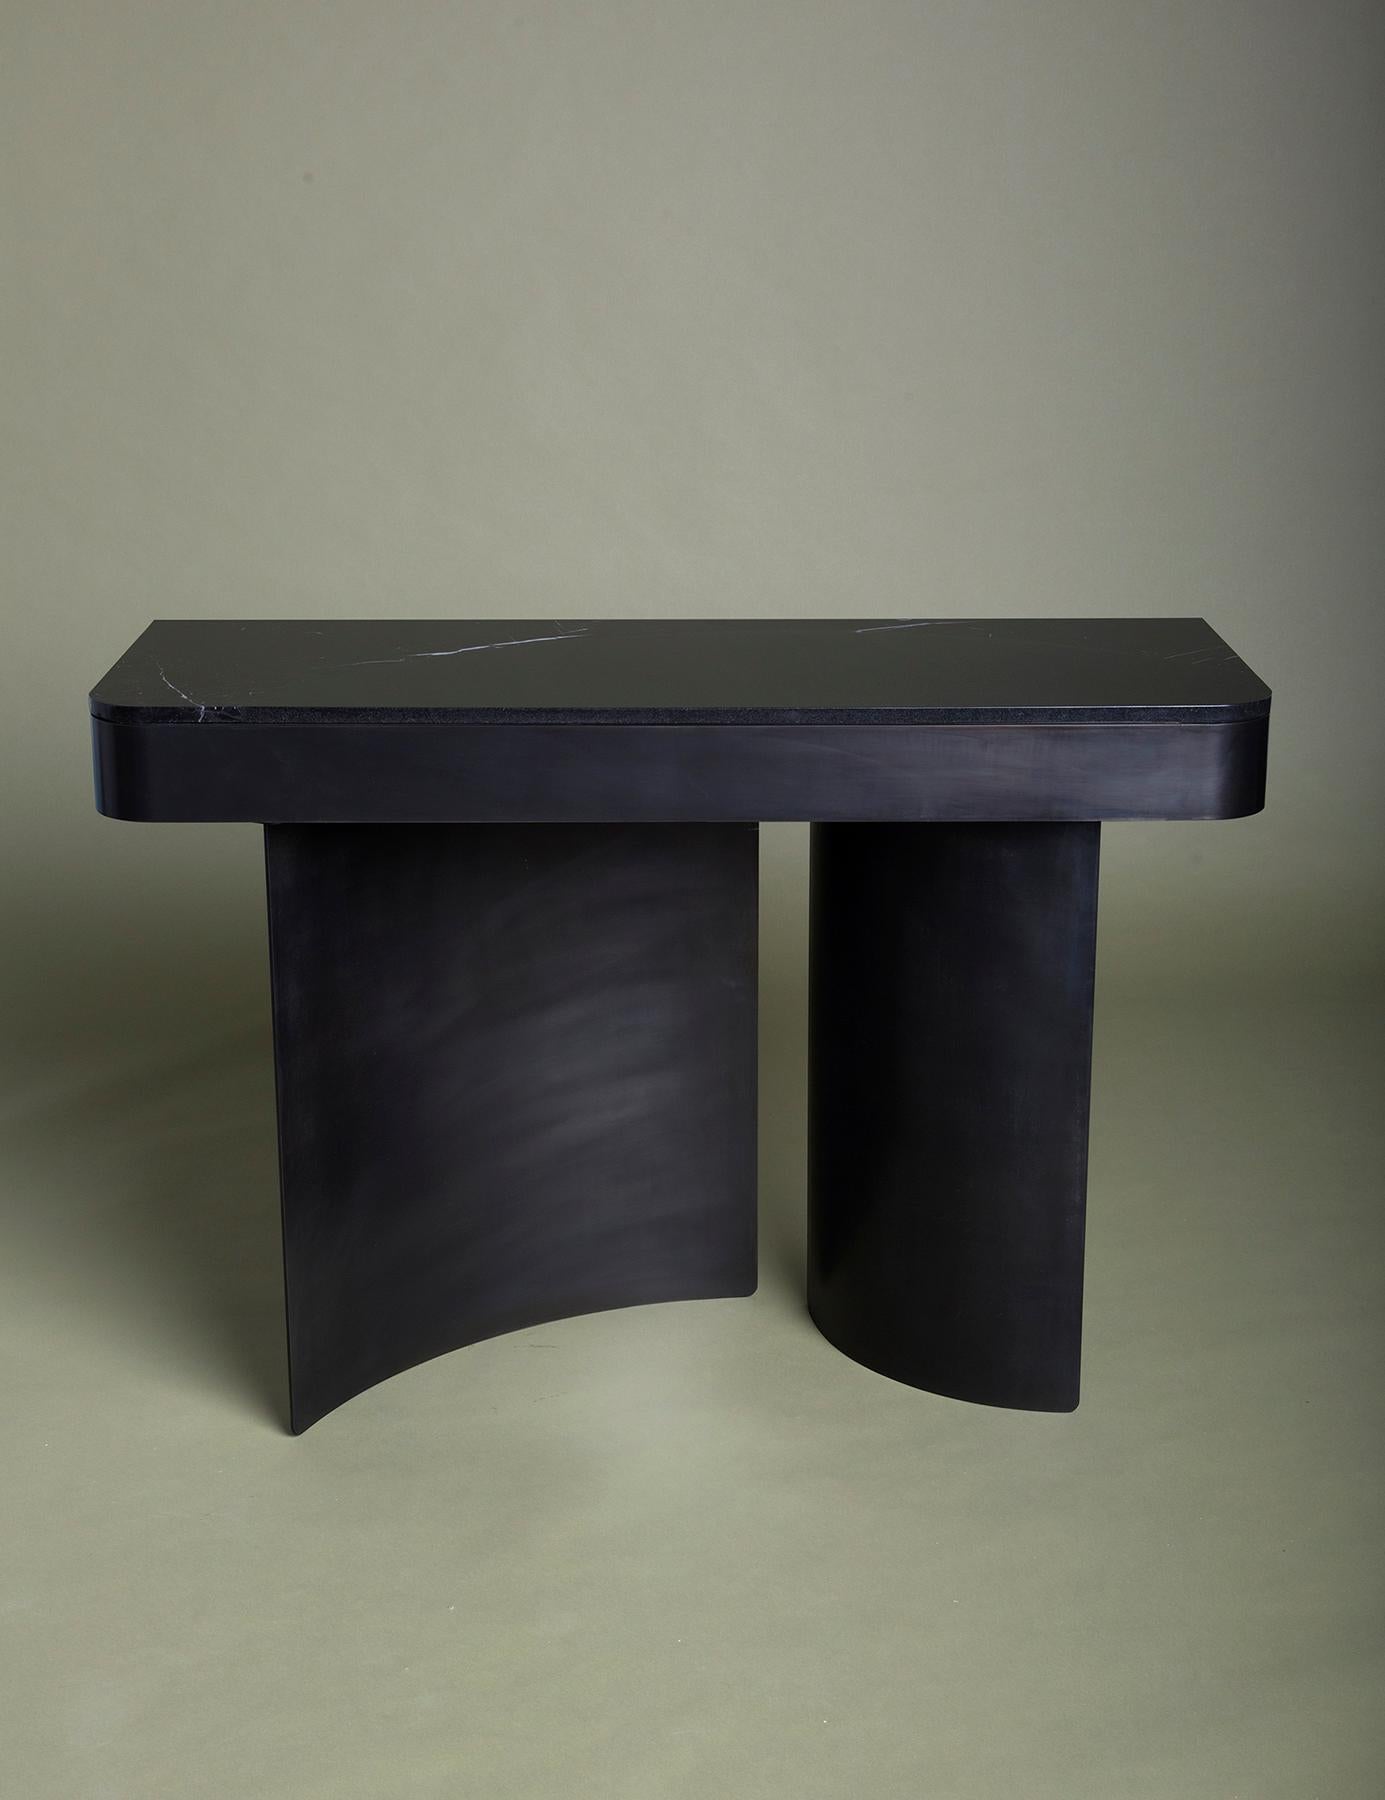 Primary circles are broken into sinuous steel arcs to form the base of the crescent console. They are then transcribed to the surface, leaving a sweeping line that separates the stone slabs. The subtle color and texture variations of the all-black